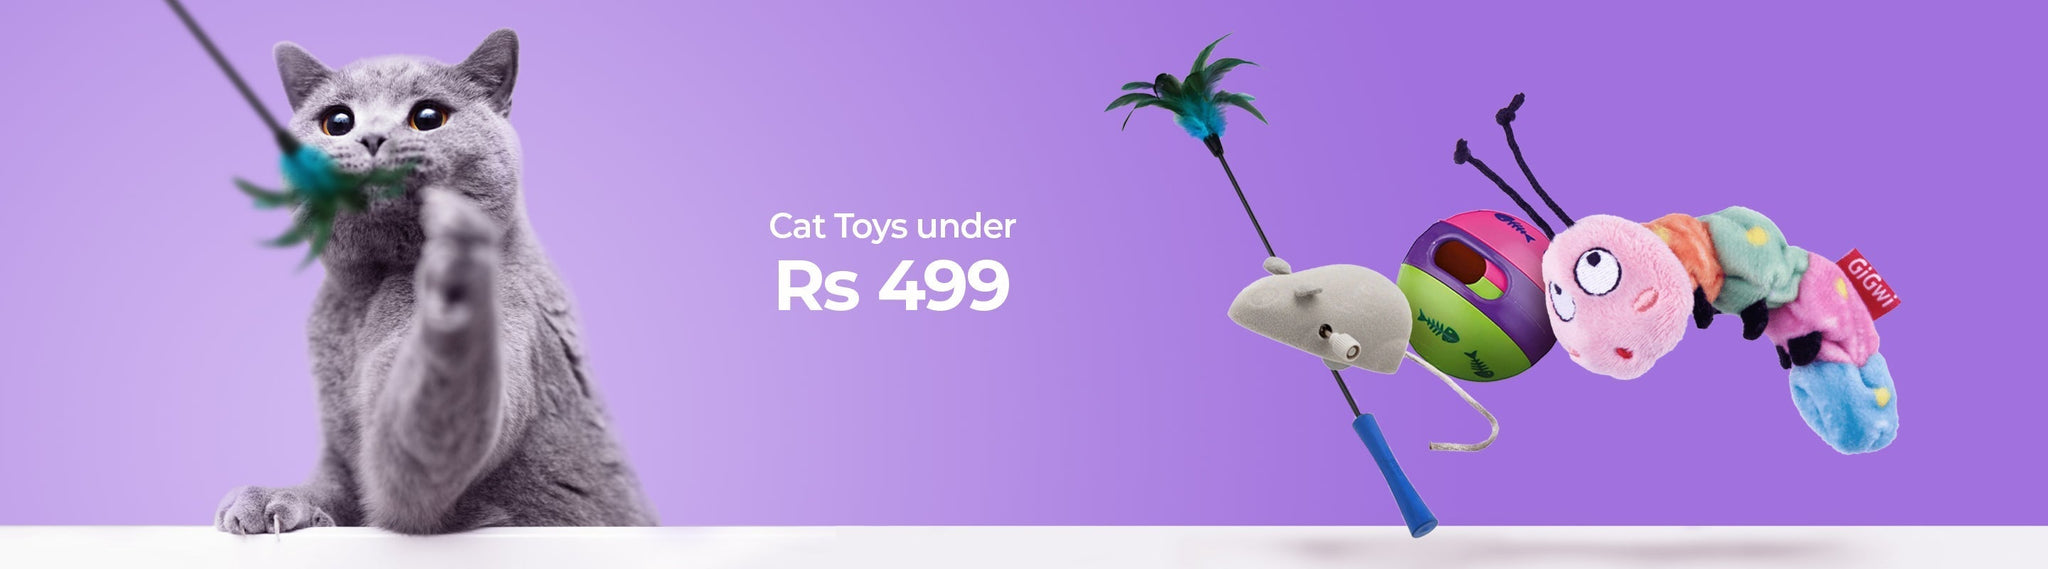 Cat Toys Under Rs 499 - Petsy